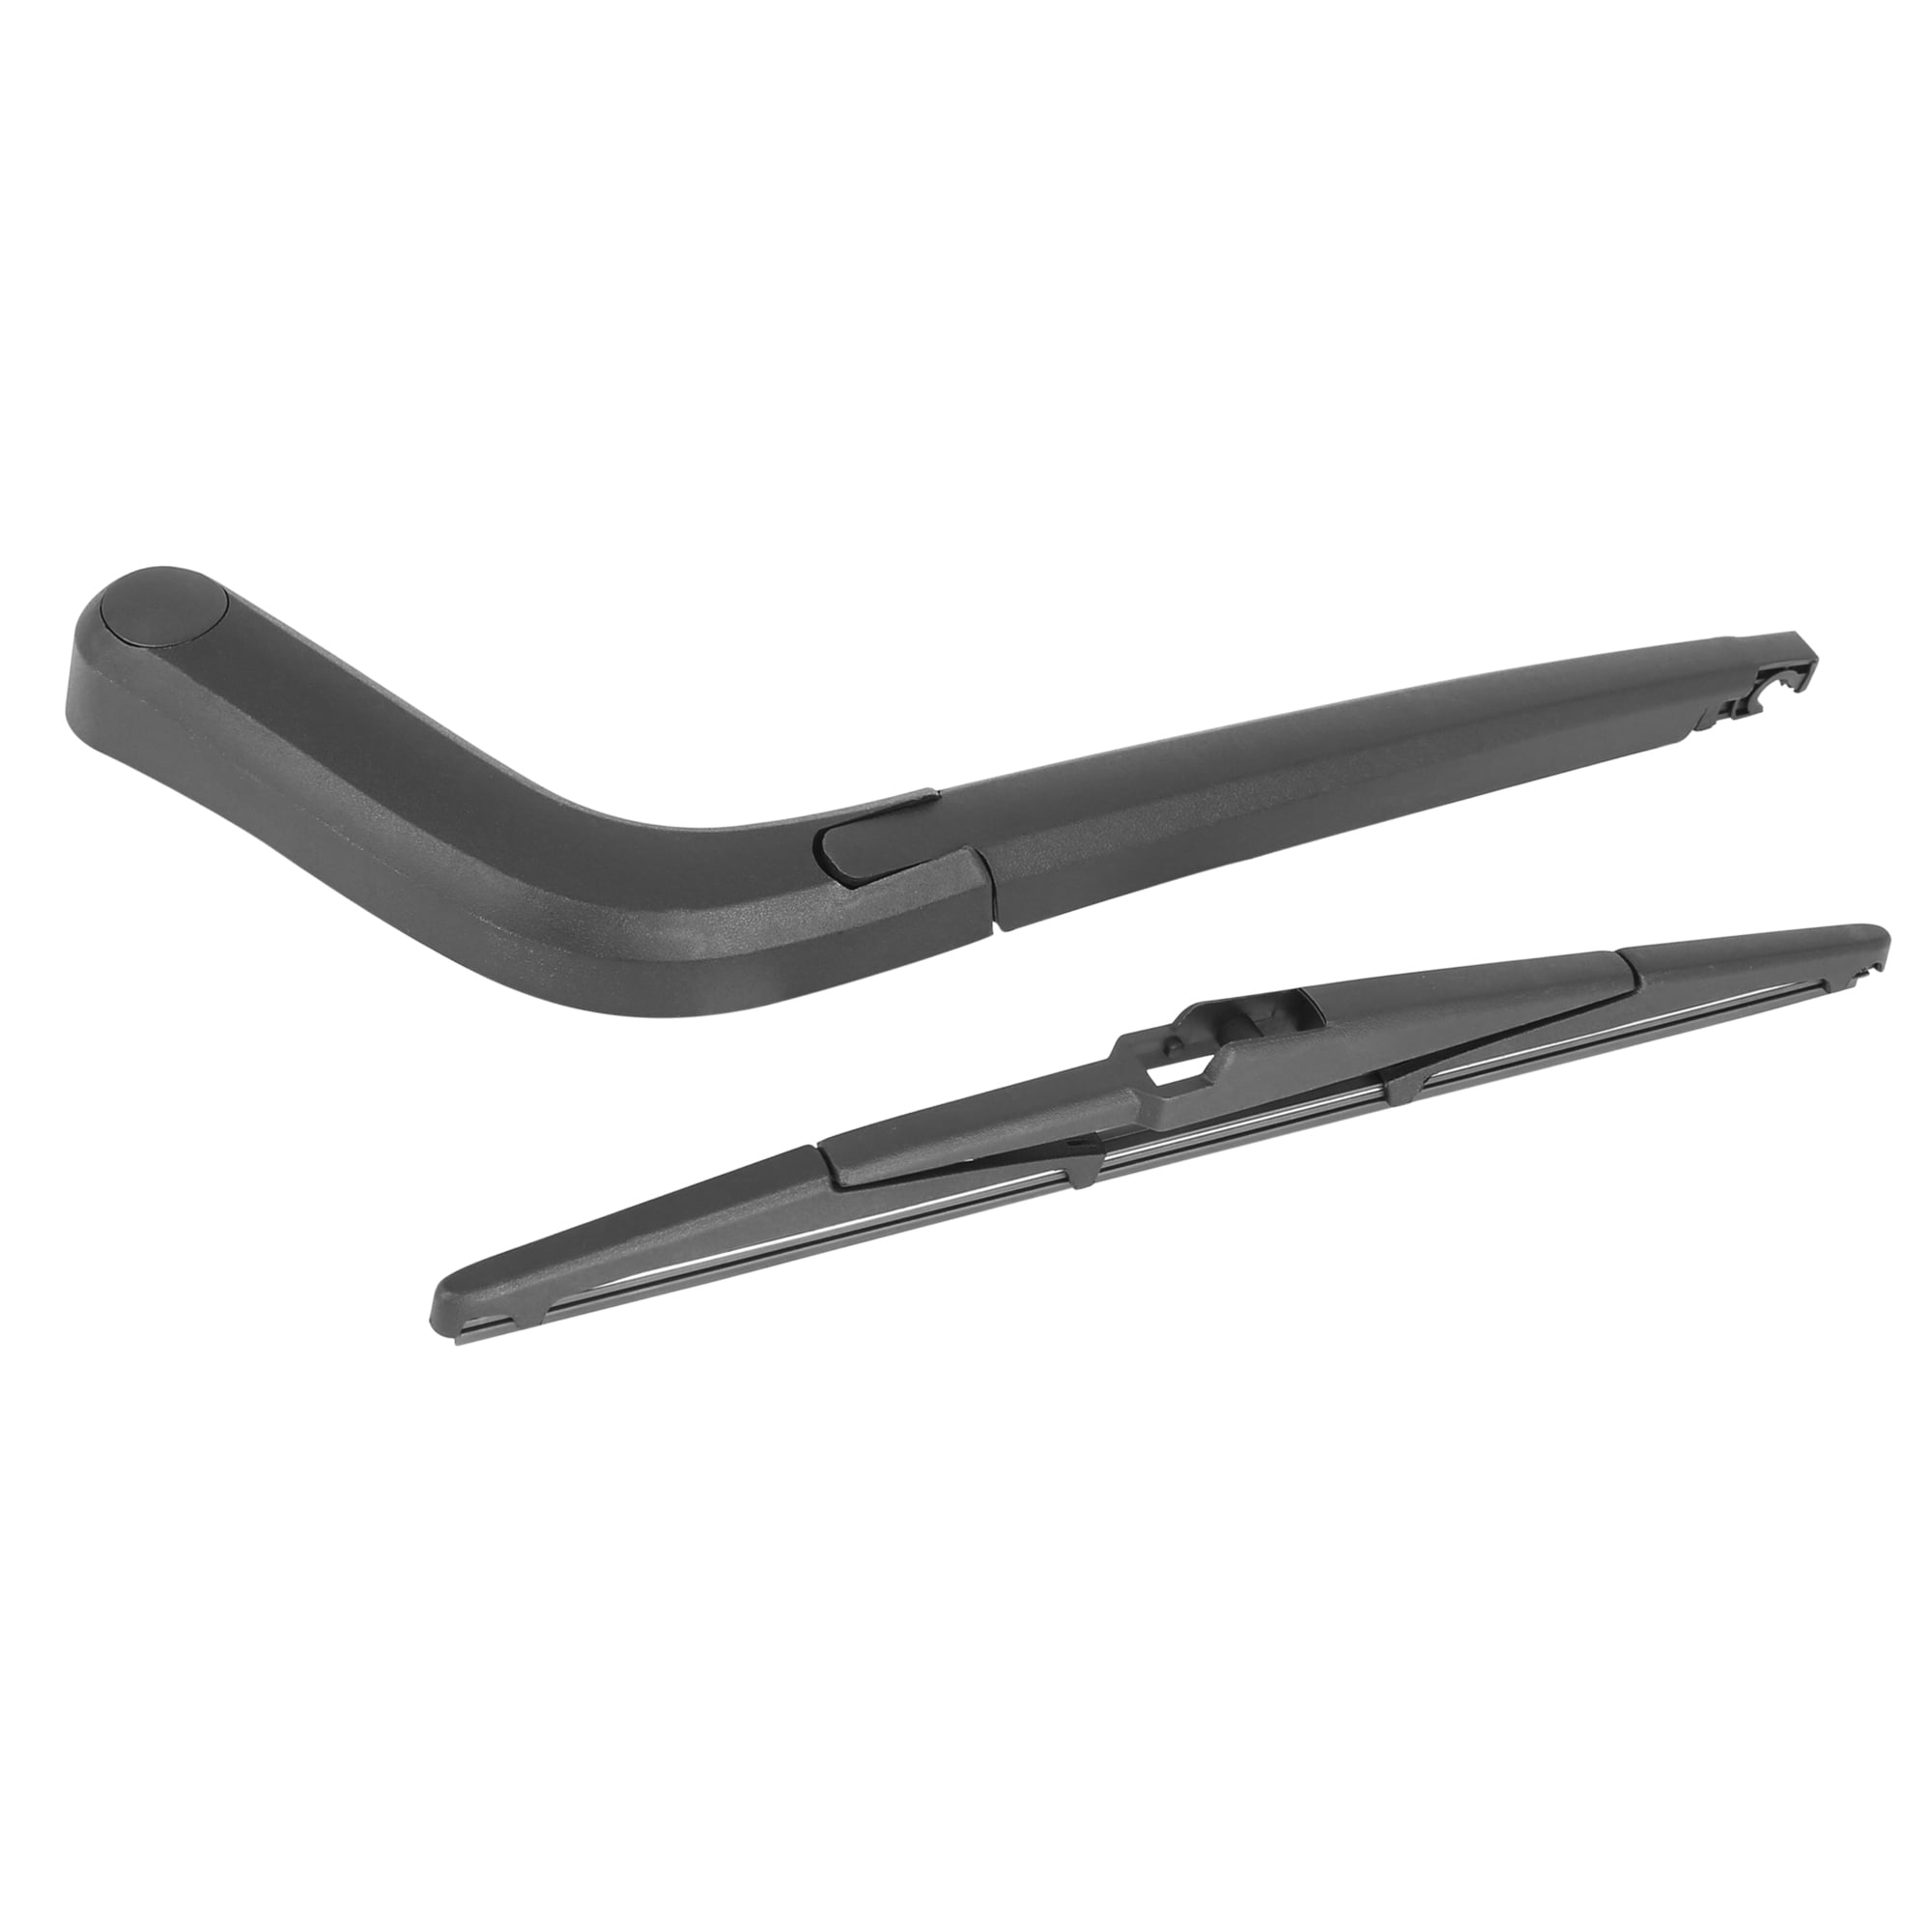 Auto Car Rear Window Wiper Blade with Arm for 2016-2020 Chevy Spark - Walmart.com - Walmart.com 2016 Chevy Spark Rear Wiper Blade Size